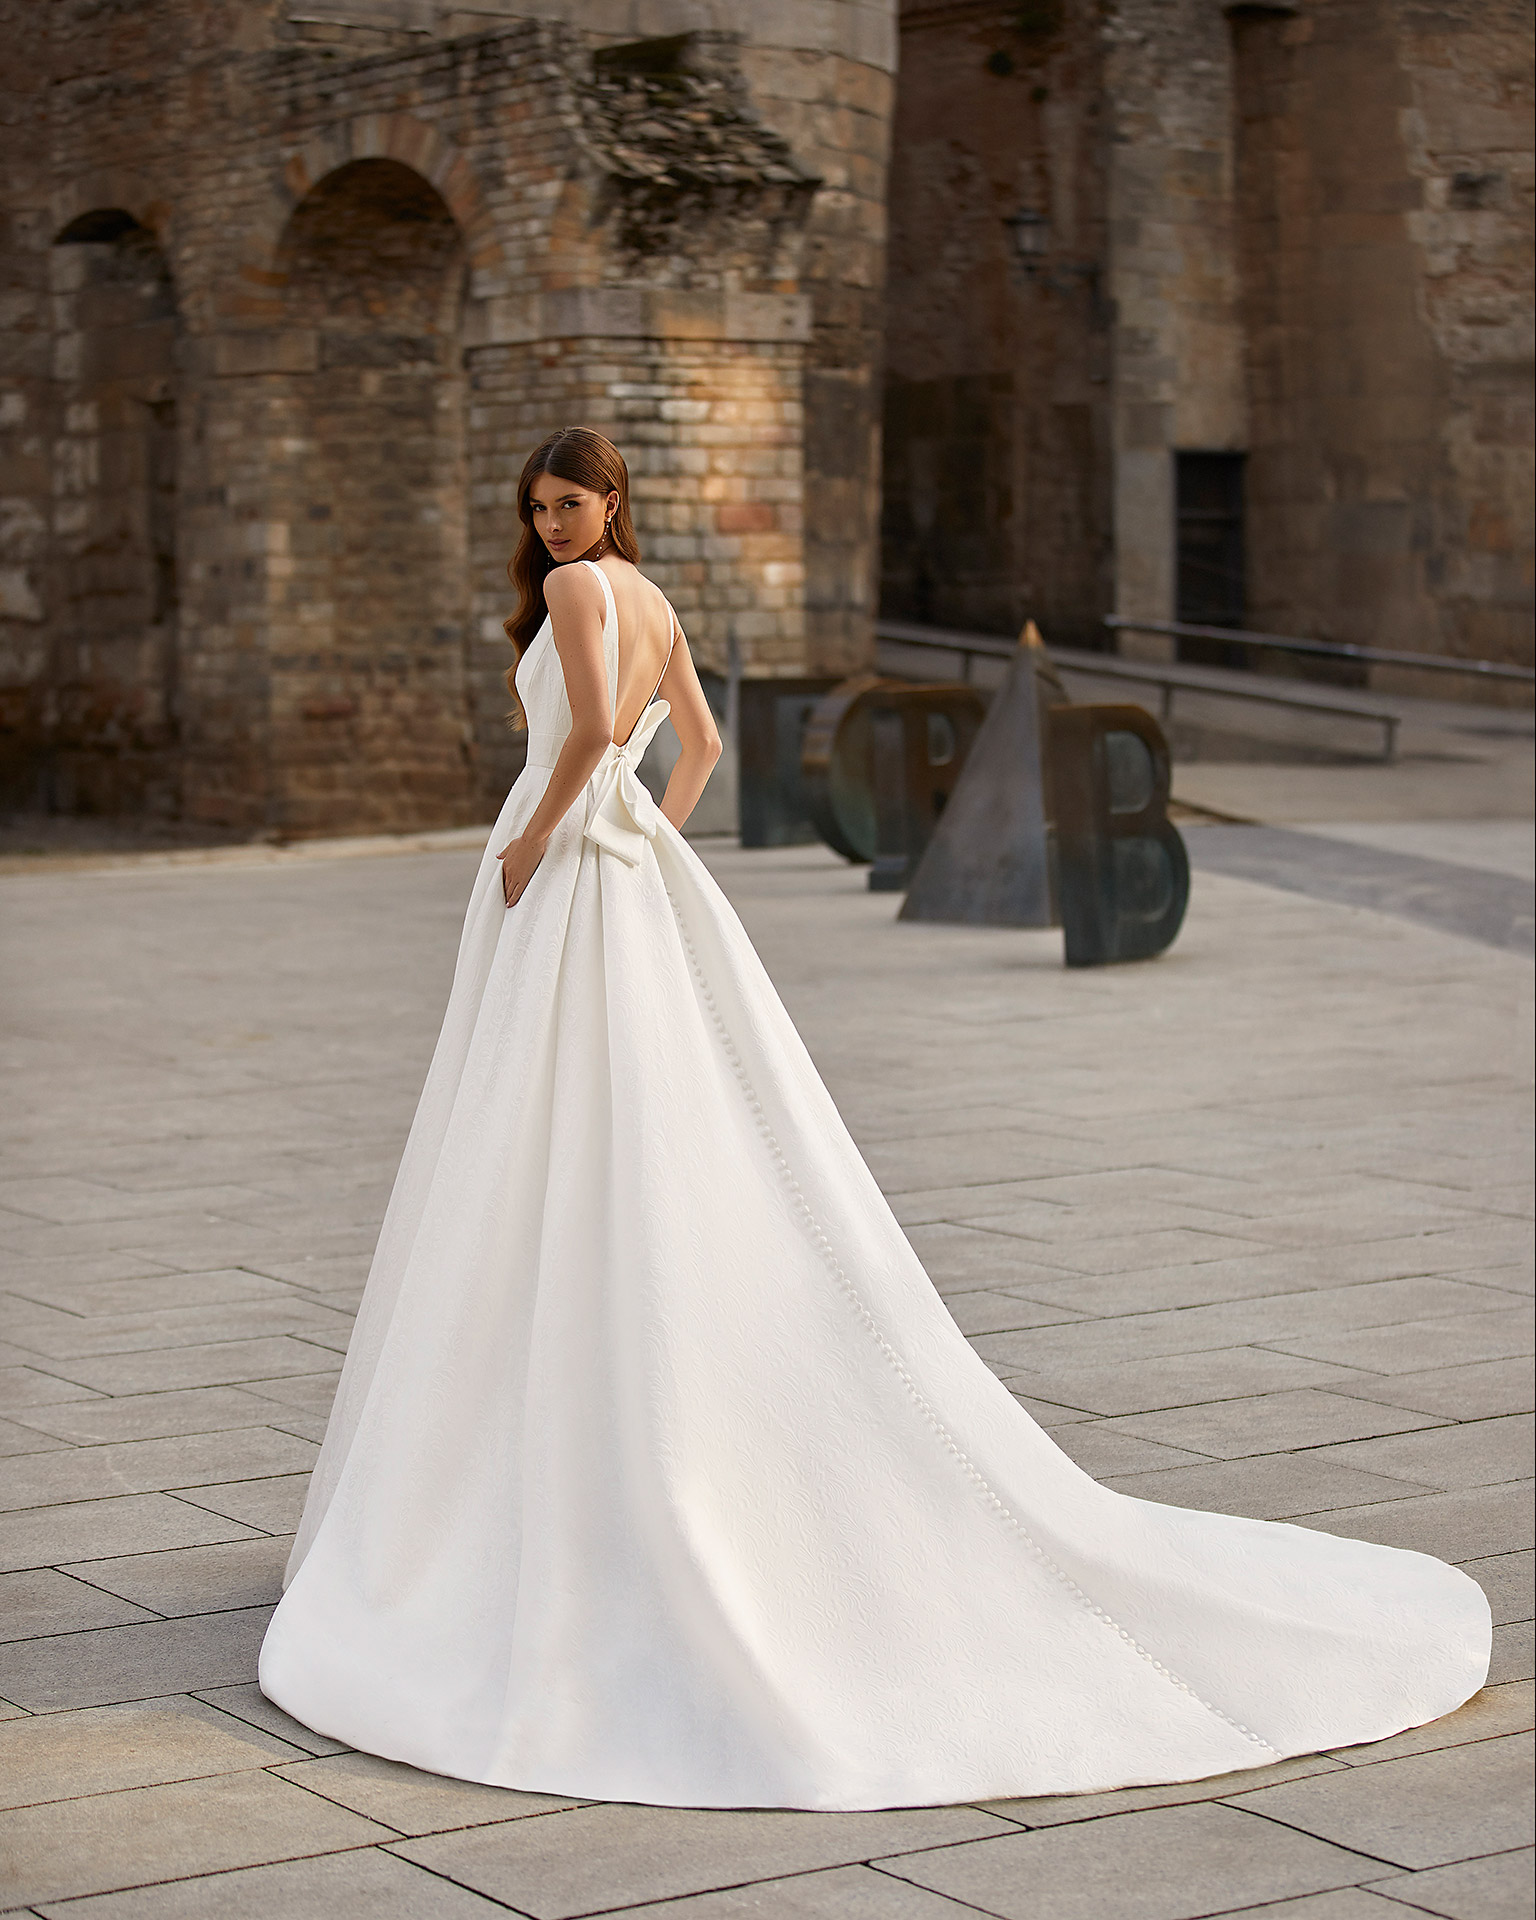 Classic-style wedding dress, made of Veneto brocade, with a voluminous sheath-style skirt; with a square neckline, an open back, and a bow at the back. Unique Luna Novias design made entirely of Veneto brocade. LUNA_NOVIAS.